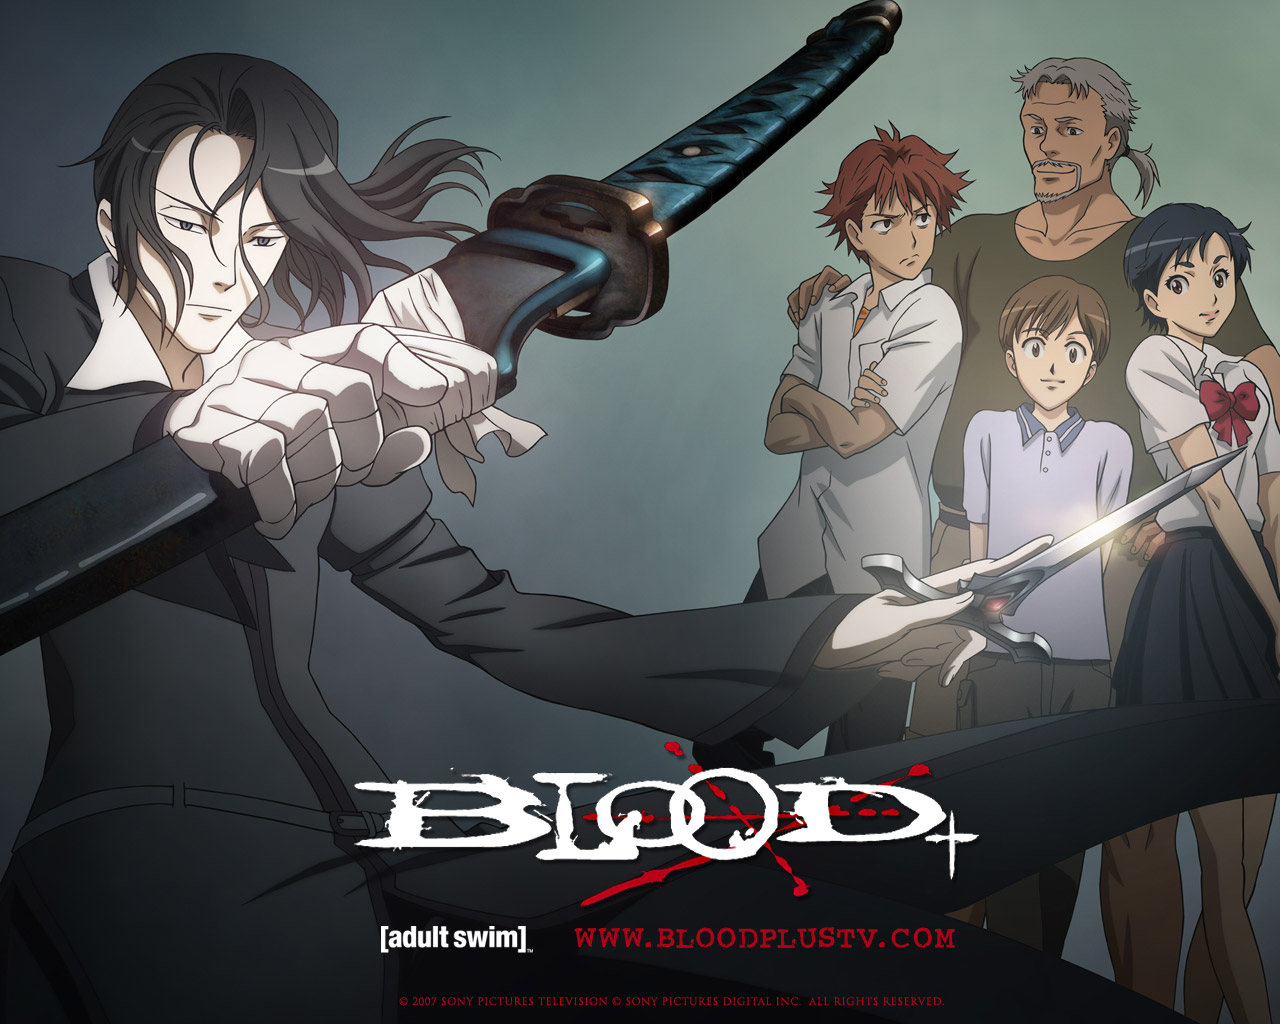 Animes The Good, the Bad, and the not worth watching. Blood